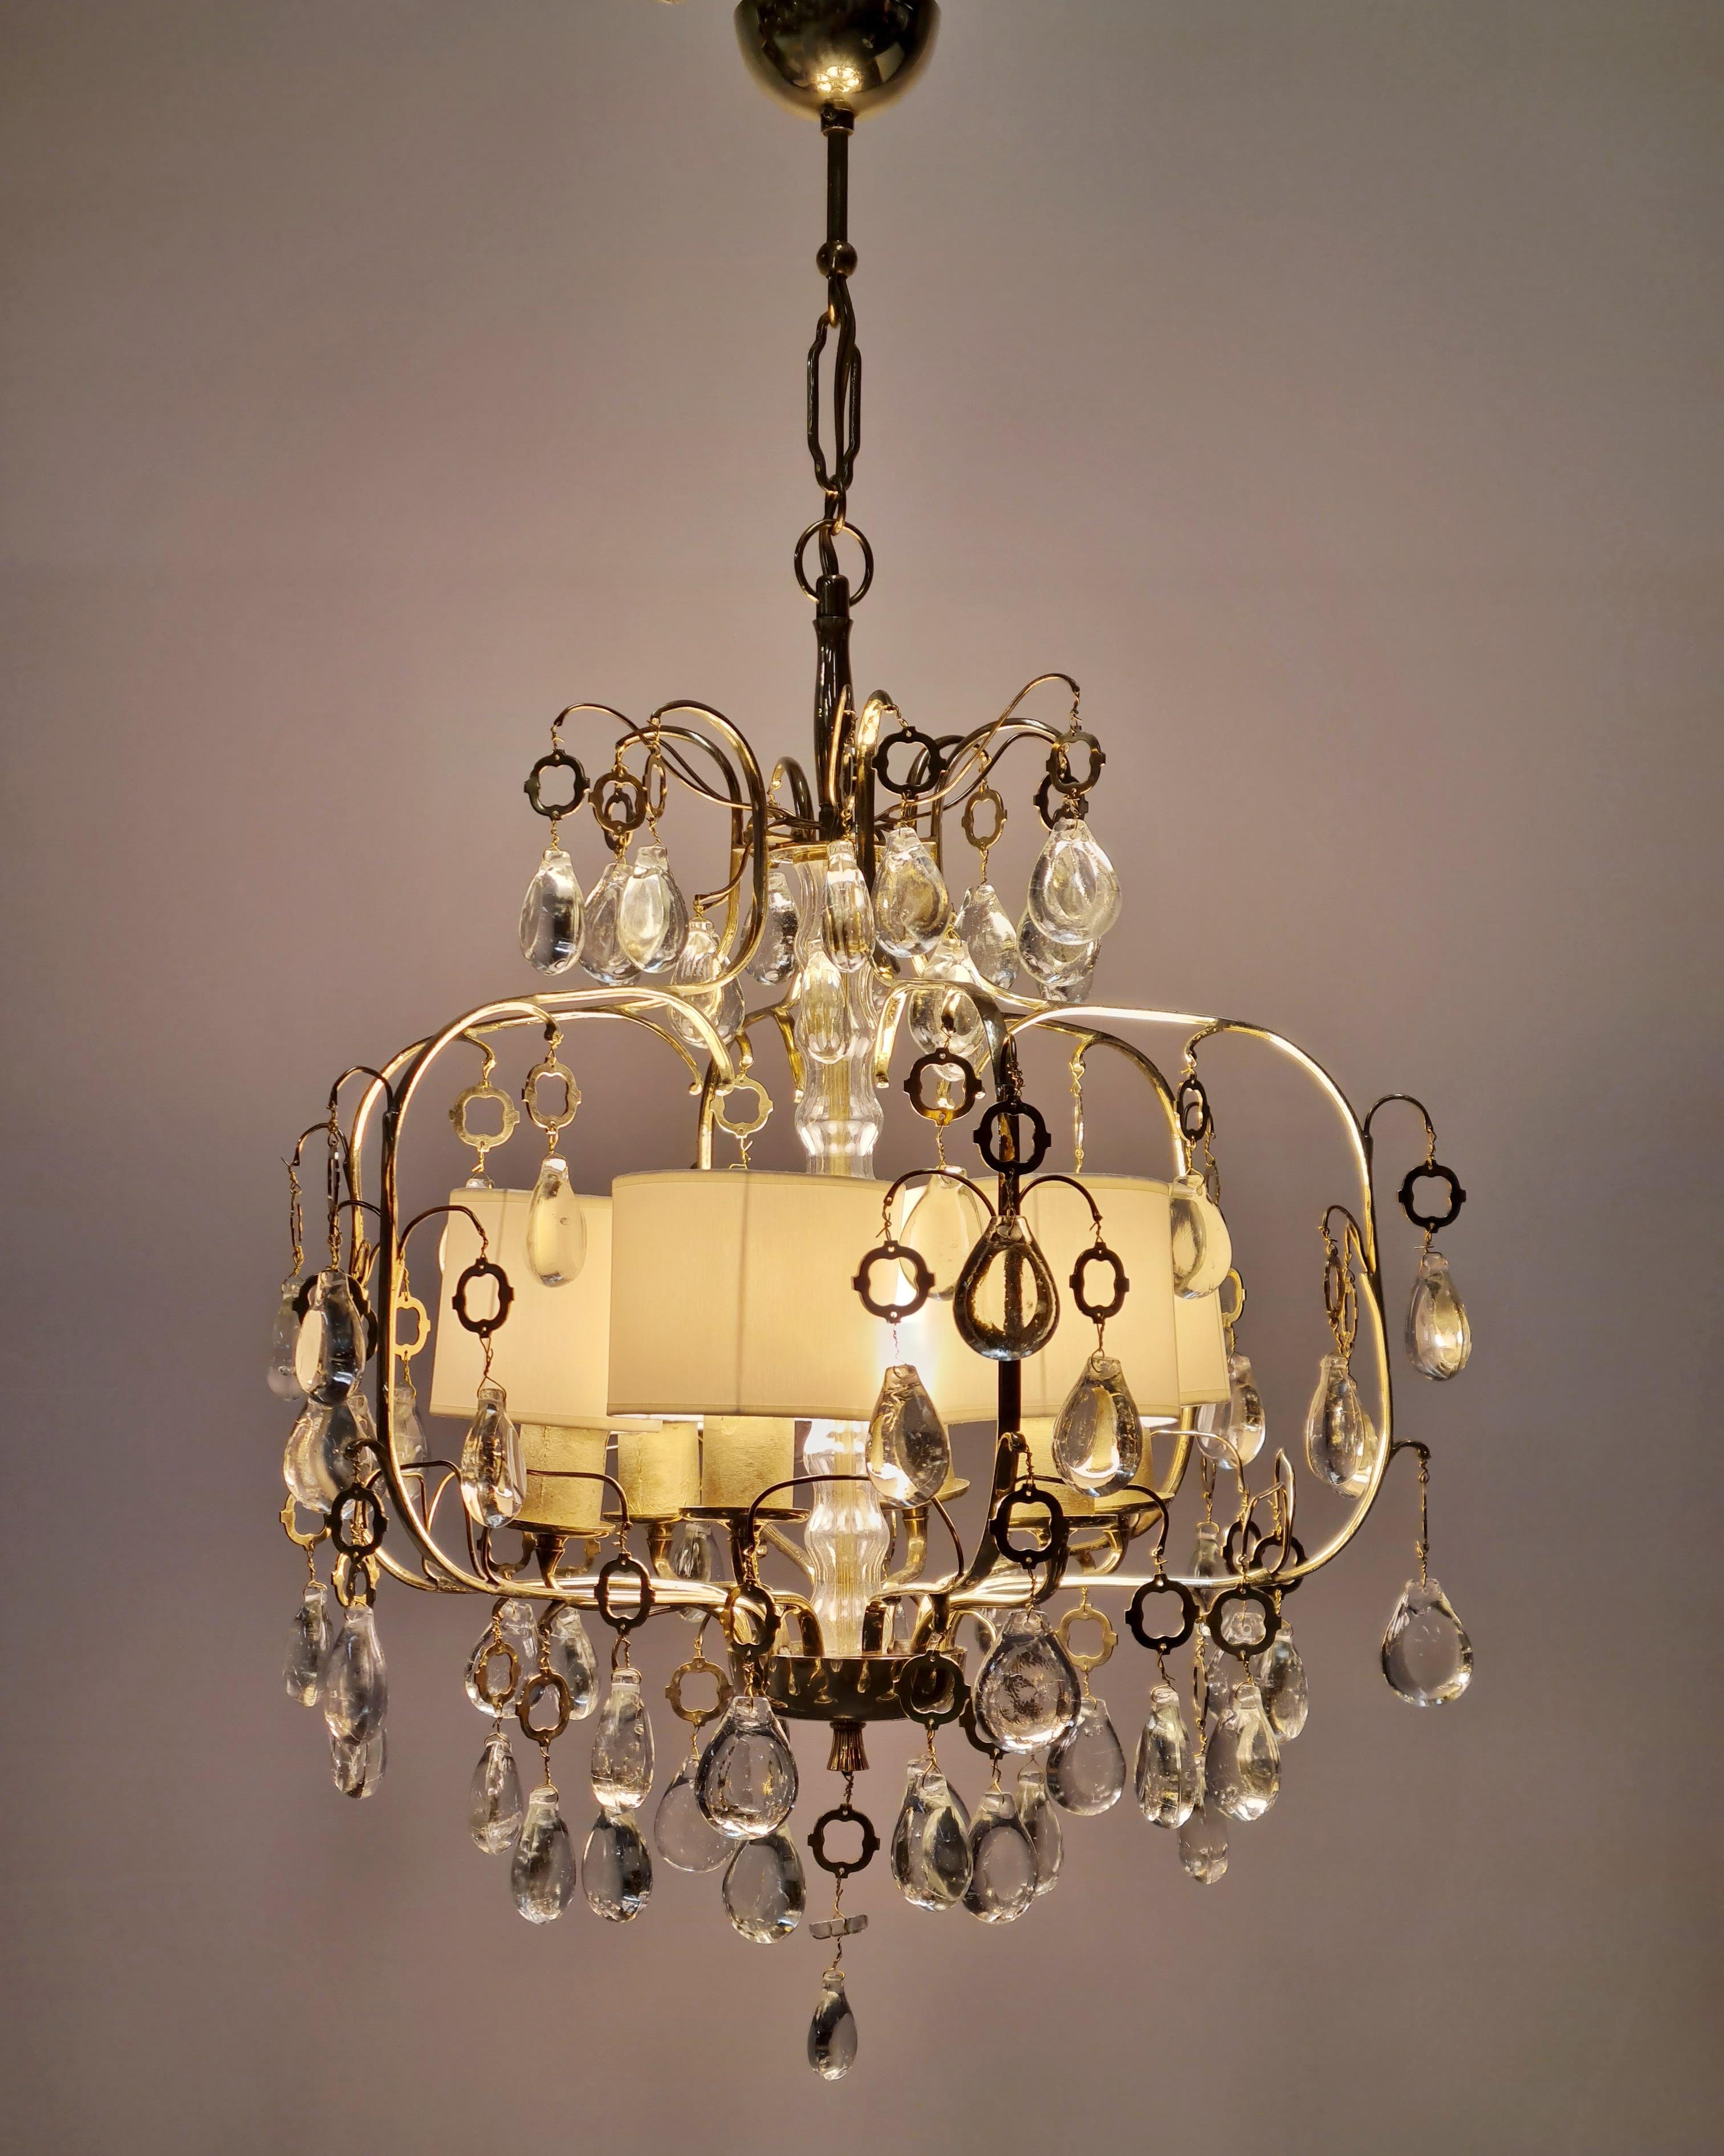 An elegant chandelier by Paavo Tynell from the 1940s and made by Taito. Different to what we usually see from Tynell, this rather classic with a modernistic touch lamp, goes to prove the versatility of his designs. 
In this design, Tynell